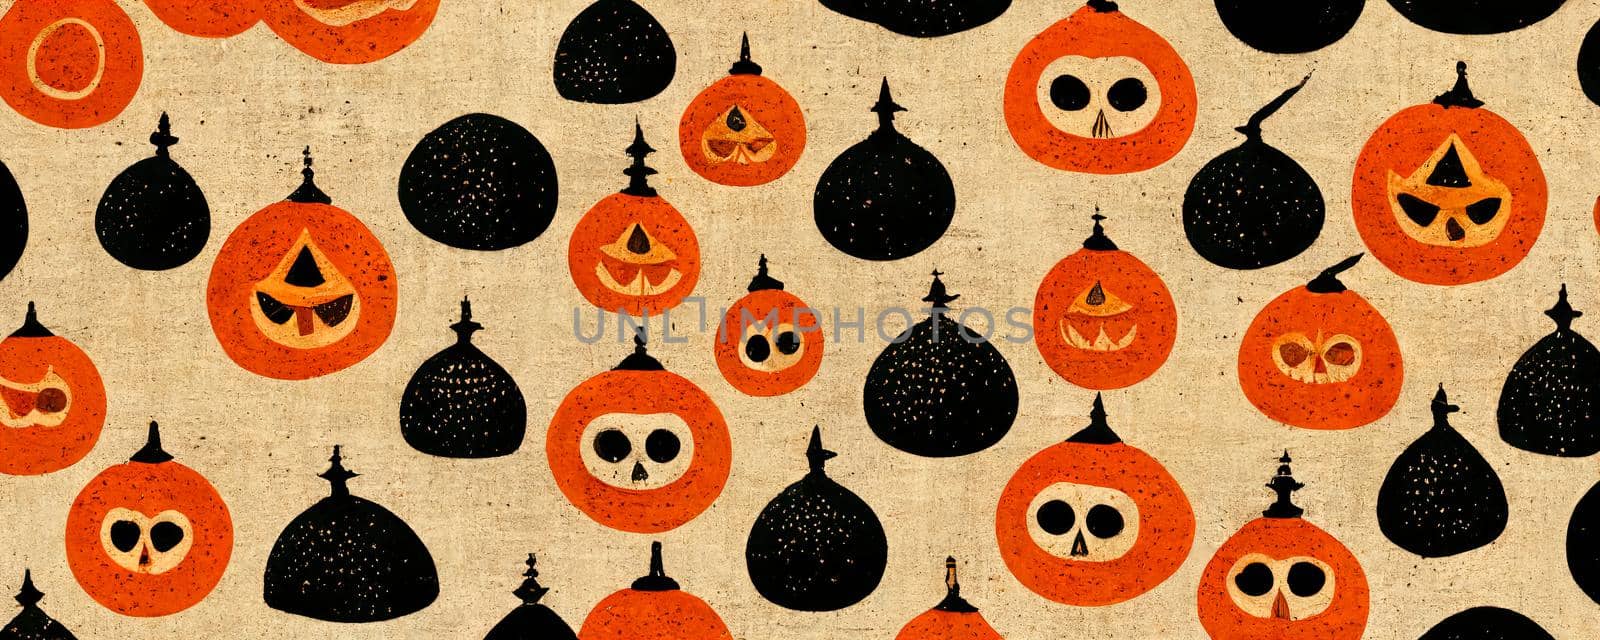 black and orange pumpkins in Halloween style on a beige background by TRMK